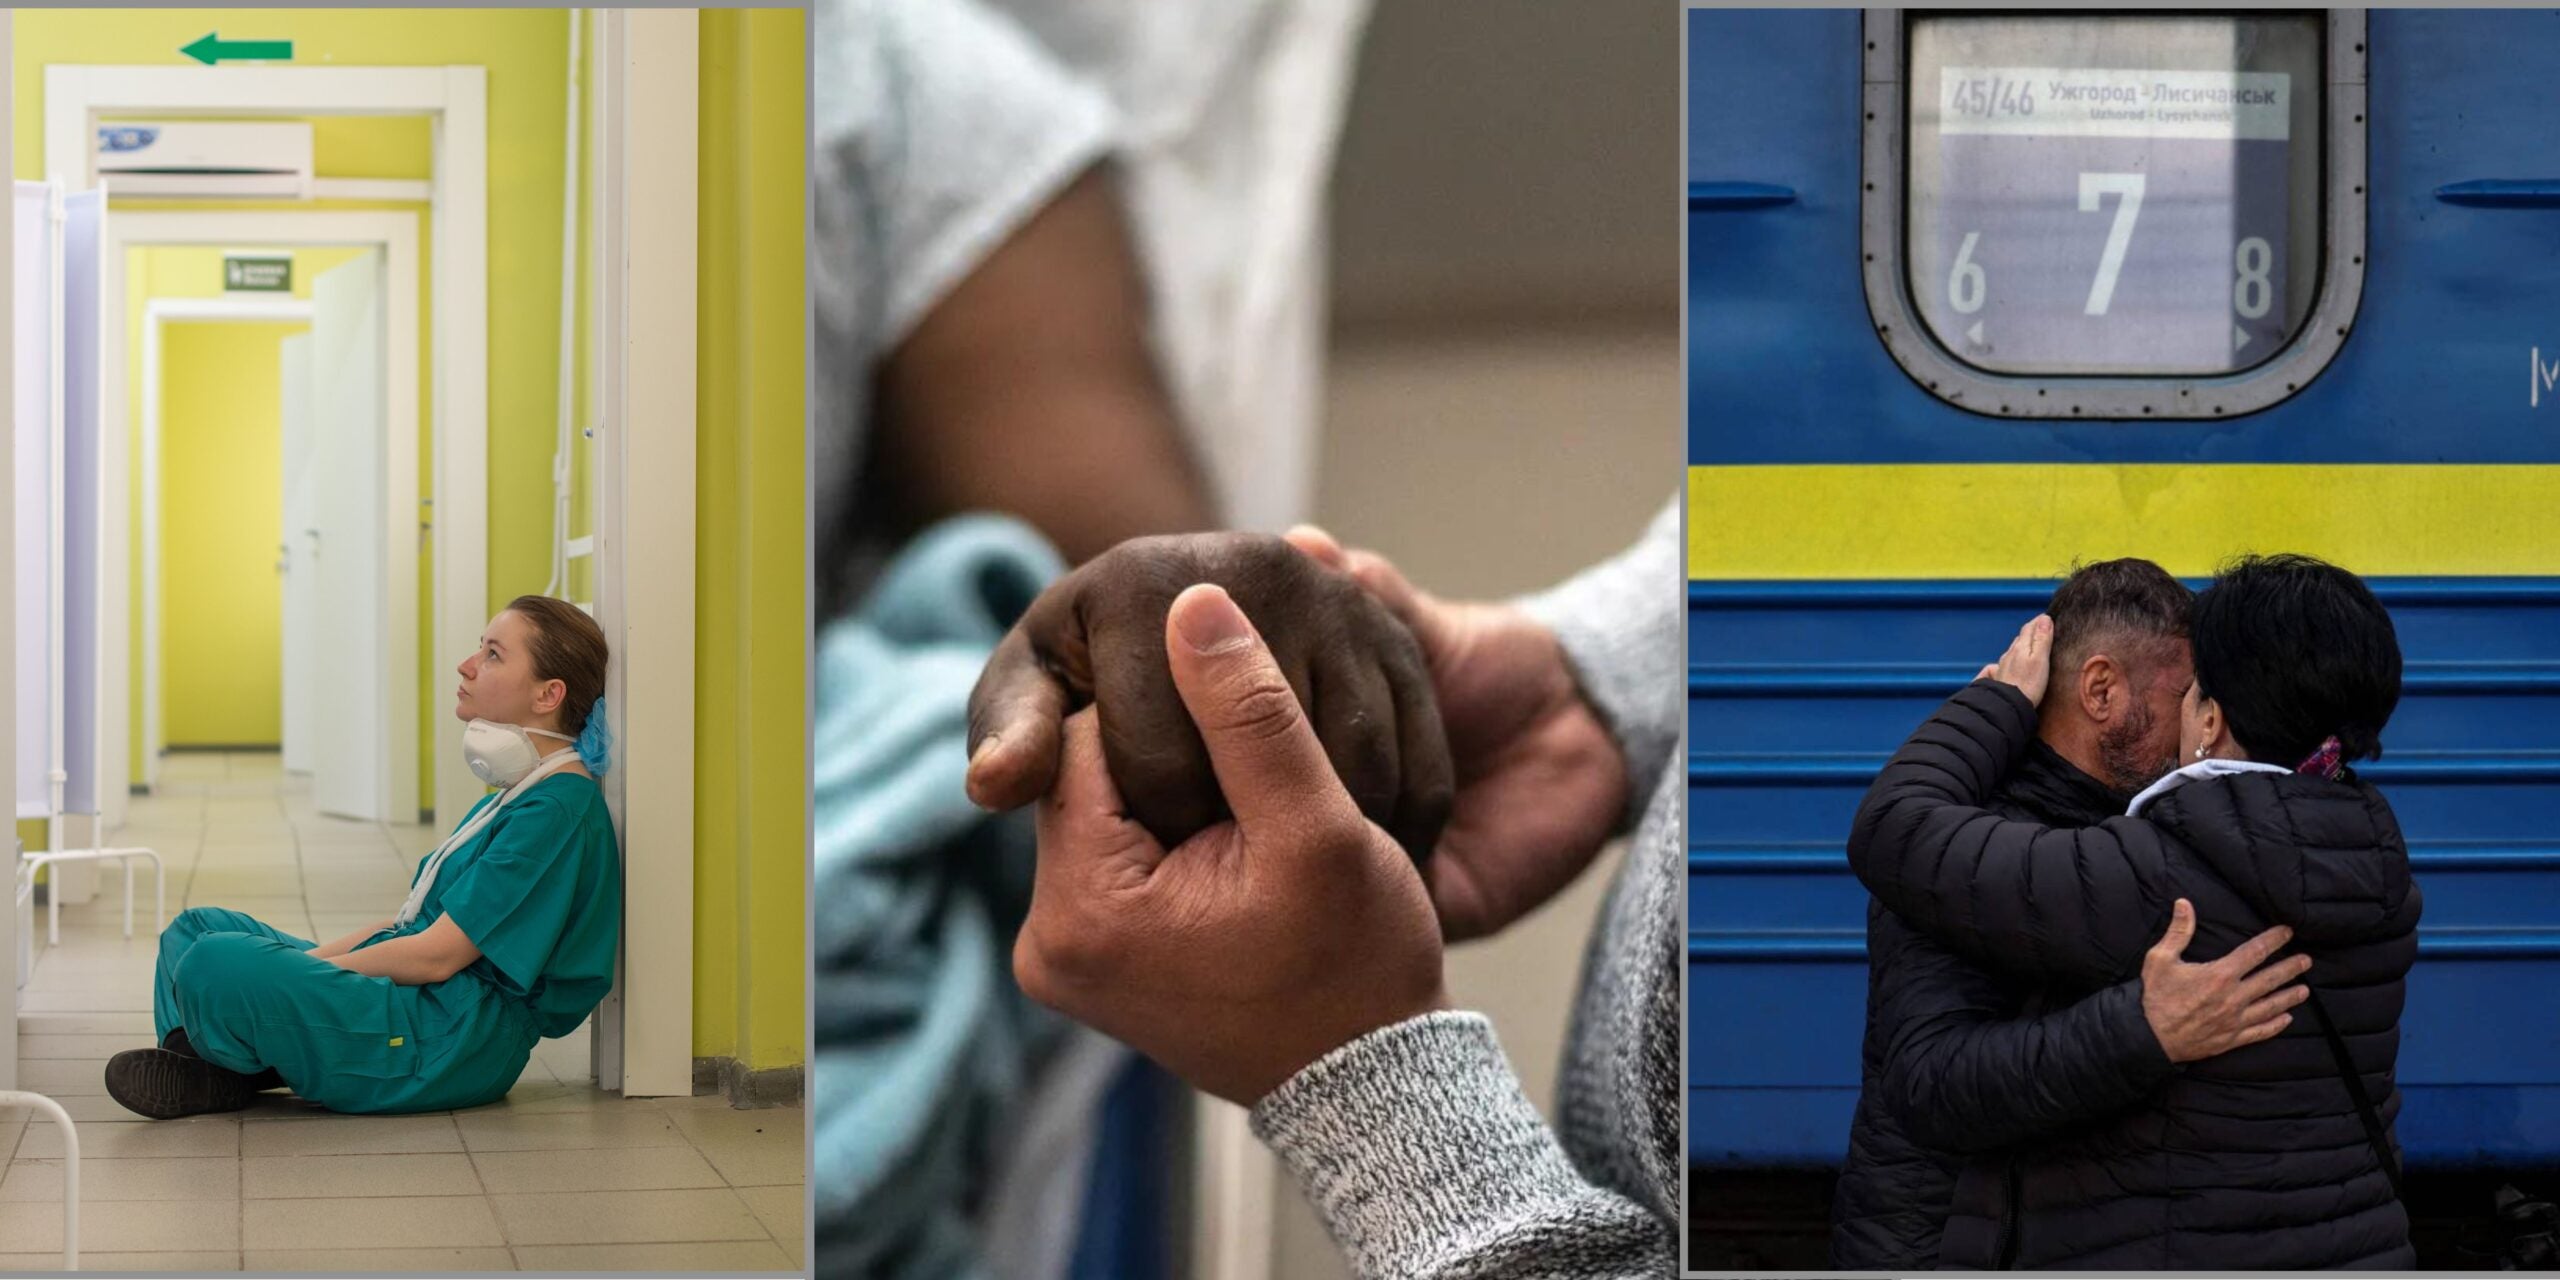 Three photos: 1) A tired female doctor sits cross-legged in a hospital corridor with a face mask pulled down. 2) A woman's hands clasp the hands of a hospital patient in a bed. 3) A couple embraces in front of a blue and yellow train in Kyiv, Ukraine.